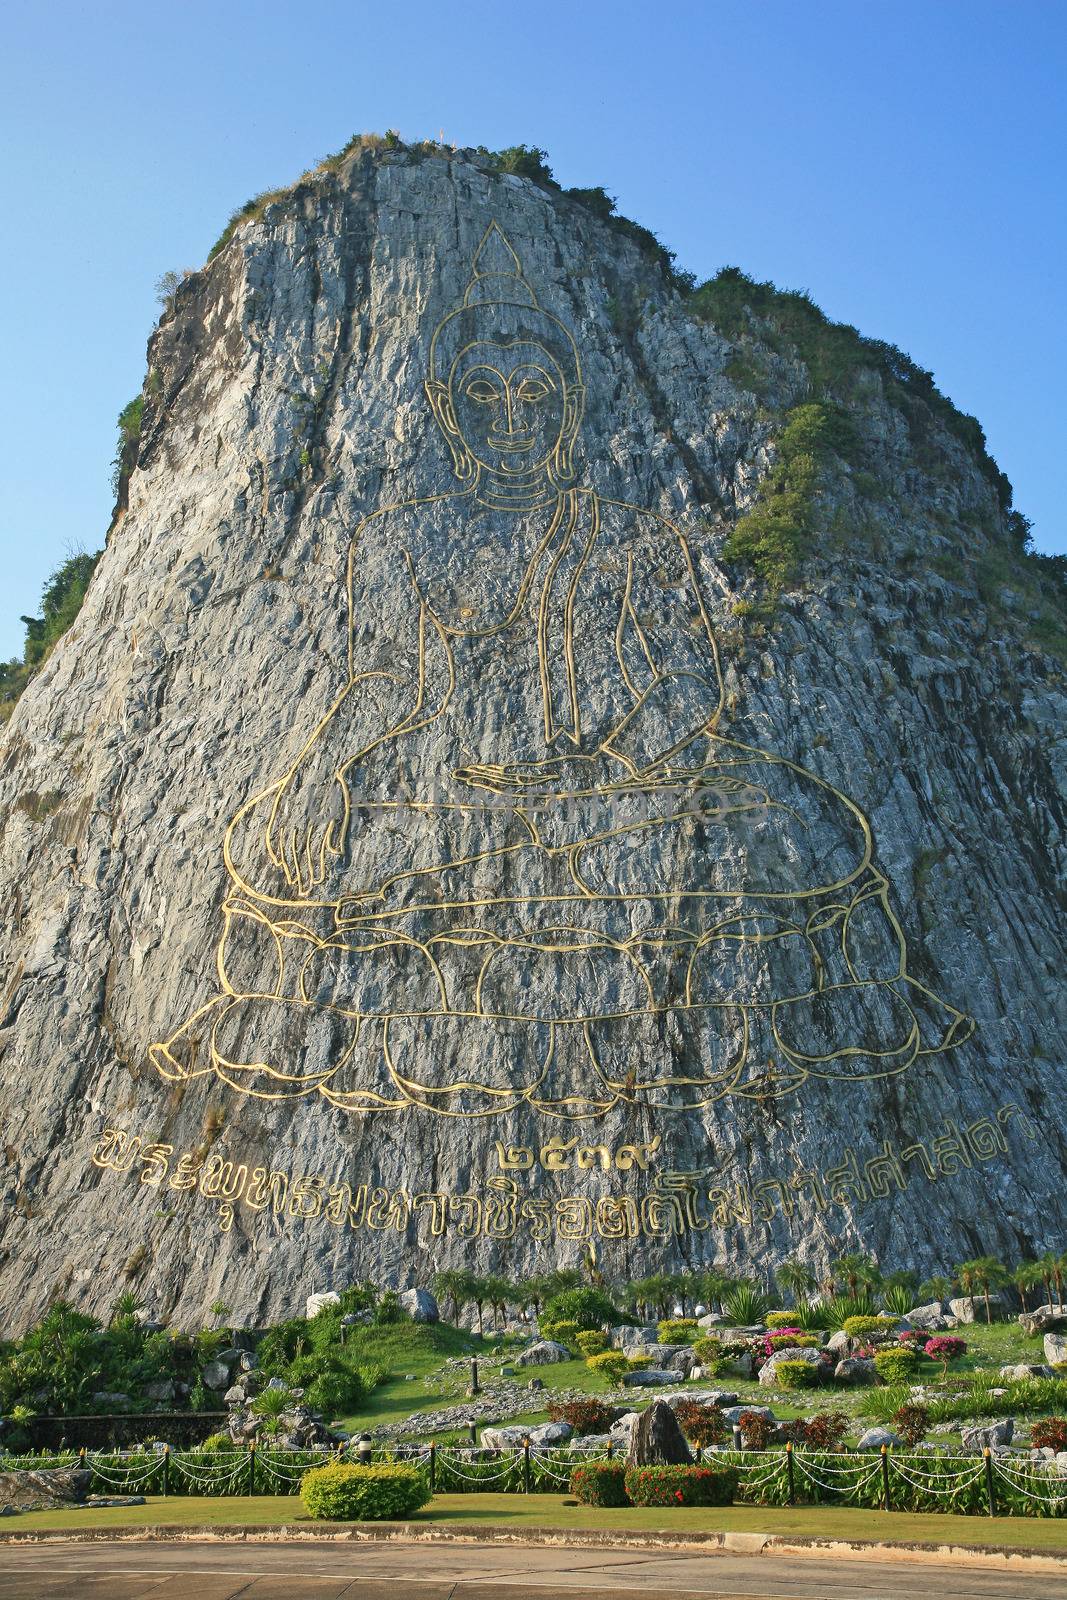 Carved buddha image on the cliff at Khao Chee Jan, Pattaya, Thai by think4photop